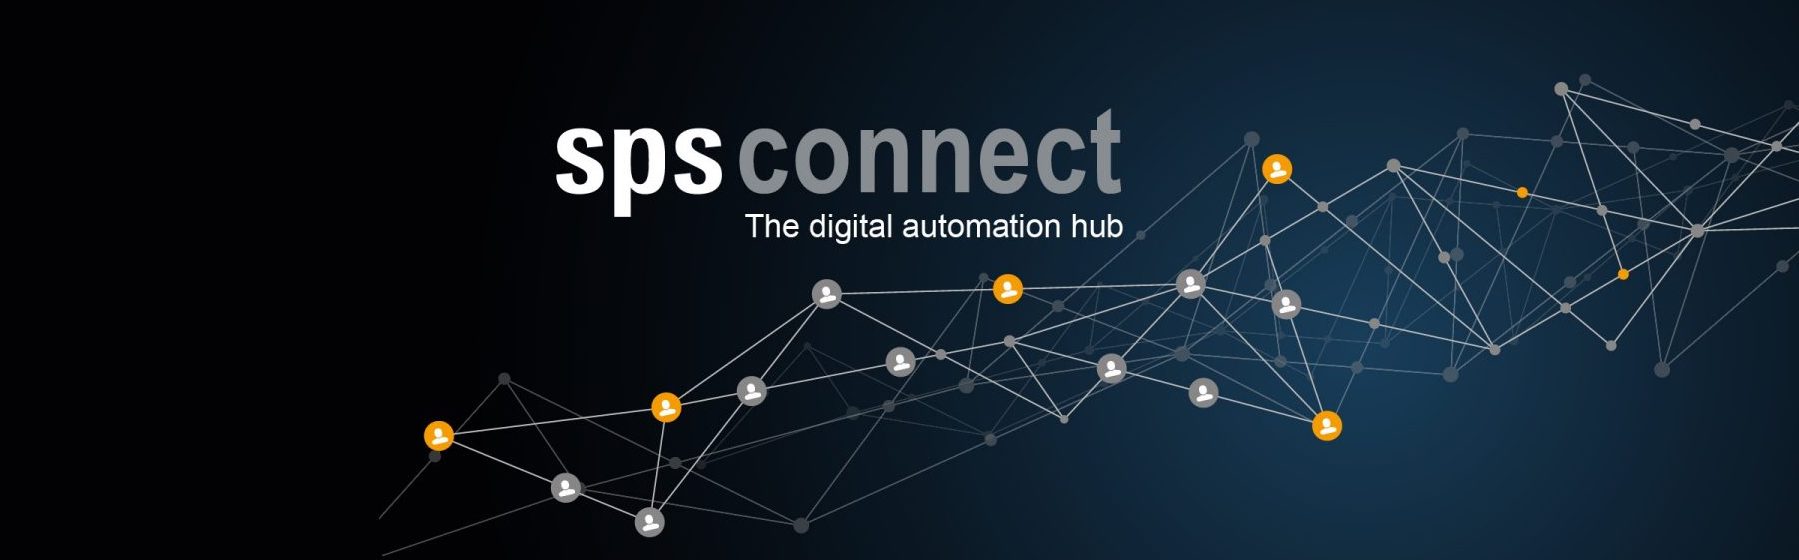 SPS Connect 2020